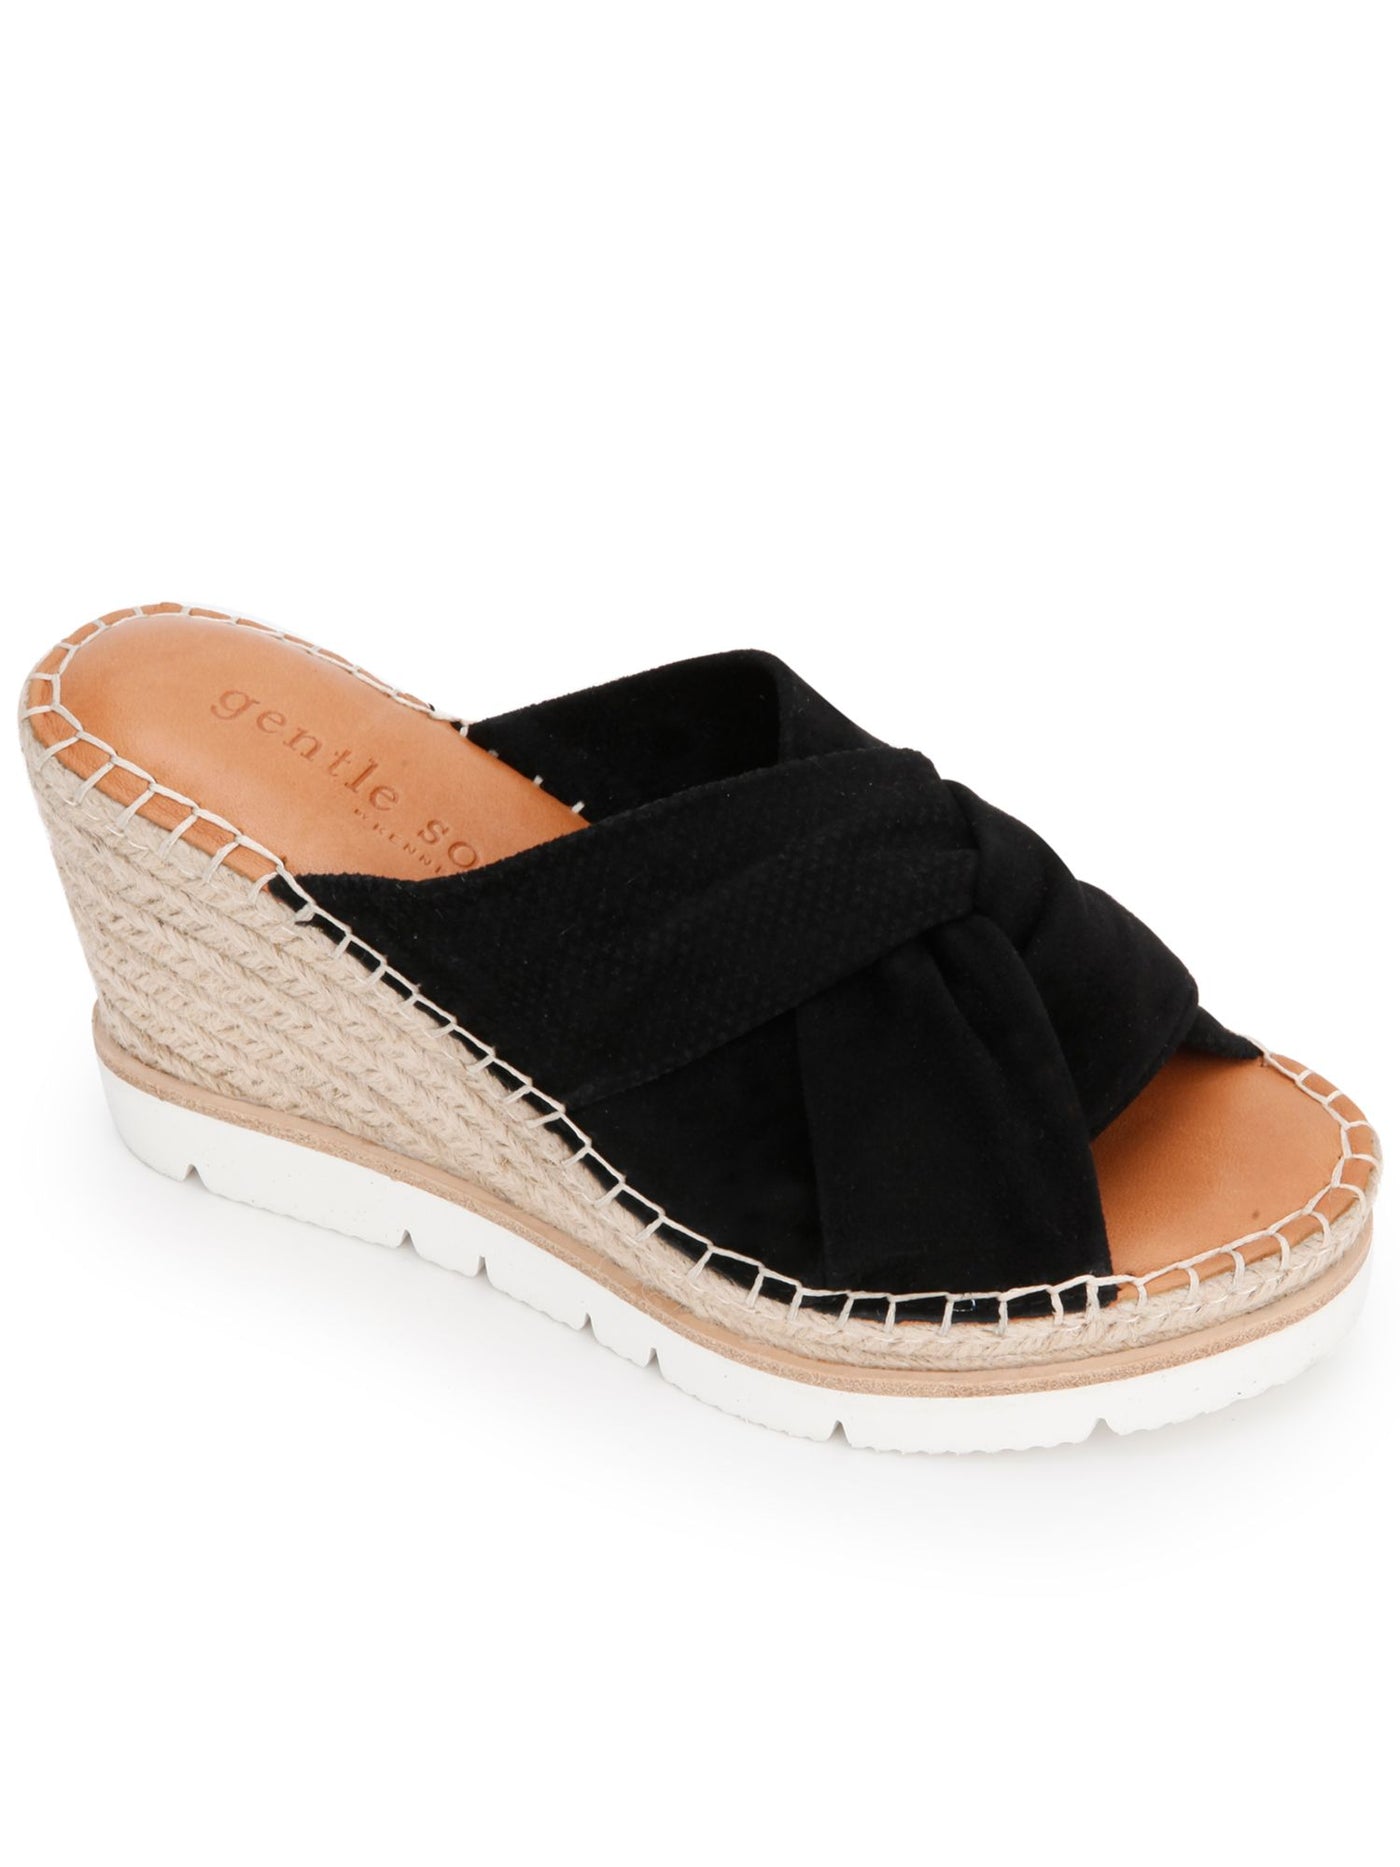 GENTLE SOULS KENNETH COLE Womens Black 1-1/2" Platform Cushioned Woven Arch Support Elyssa Braid 2 Round Toe Wedge Slip On Leather Espadrille Shoes 8.5